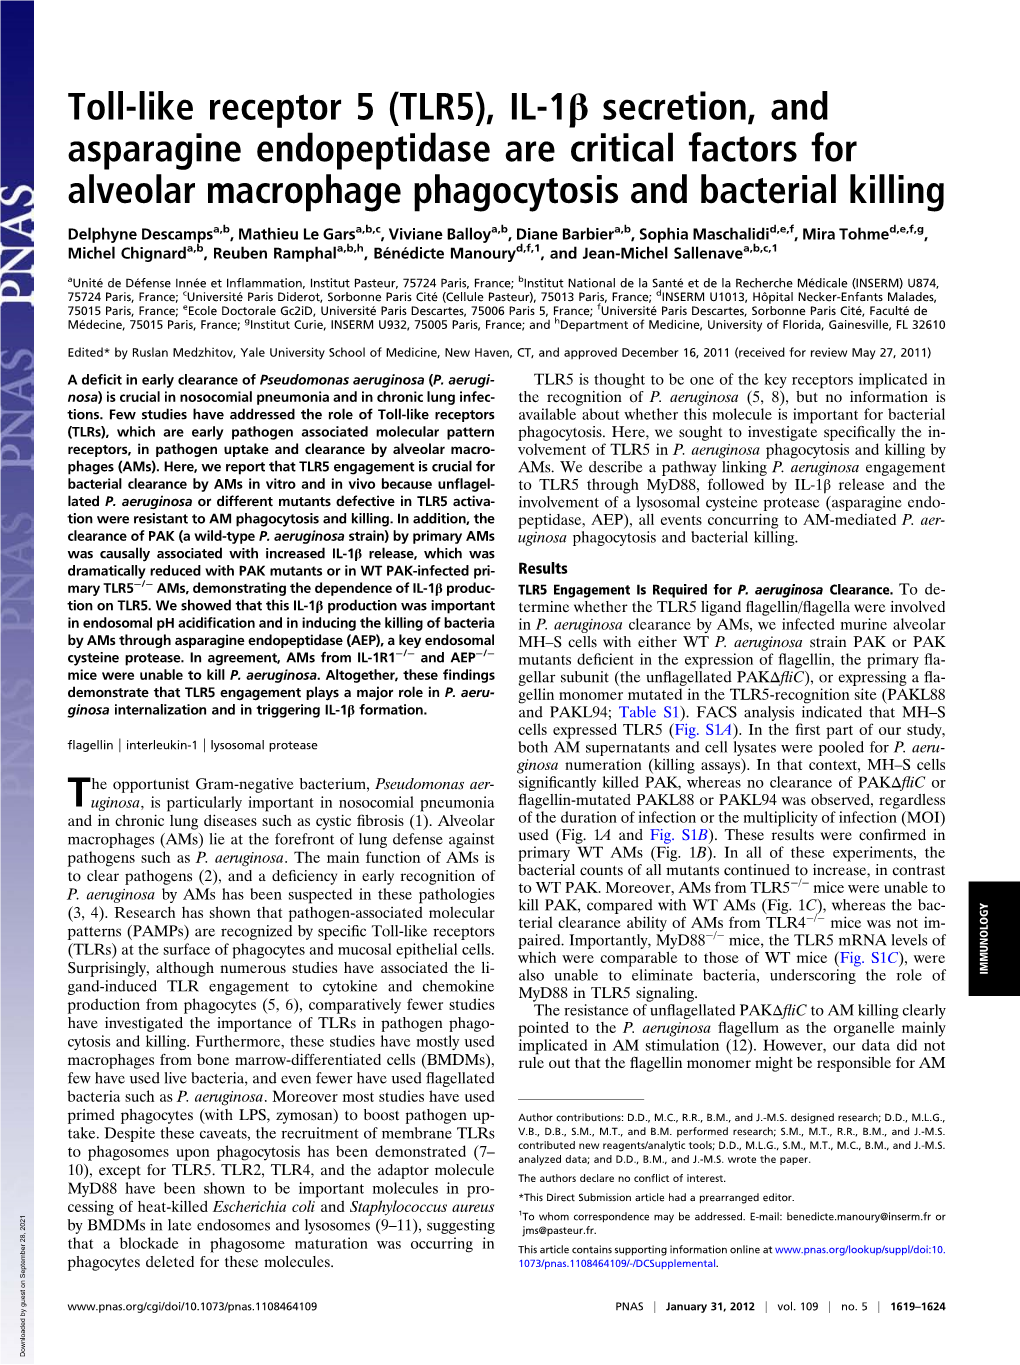 TLR5), IL-1Β Secretion, and Asparagine Endopeptidase Are Critical Factors for Alveolar Macrophage Phagocytosis and Bacterial Killing